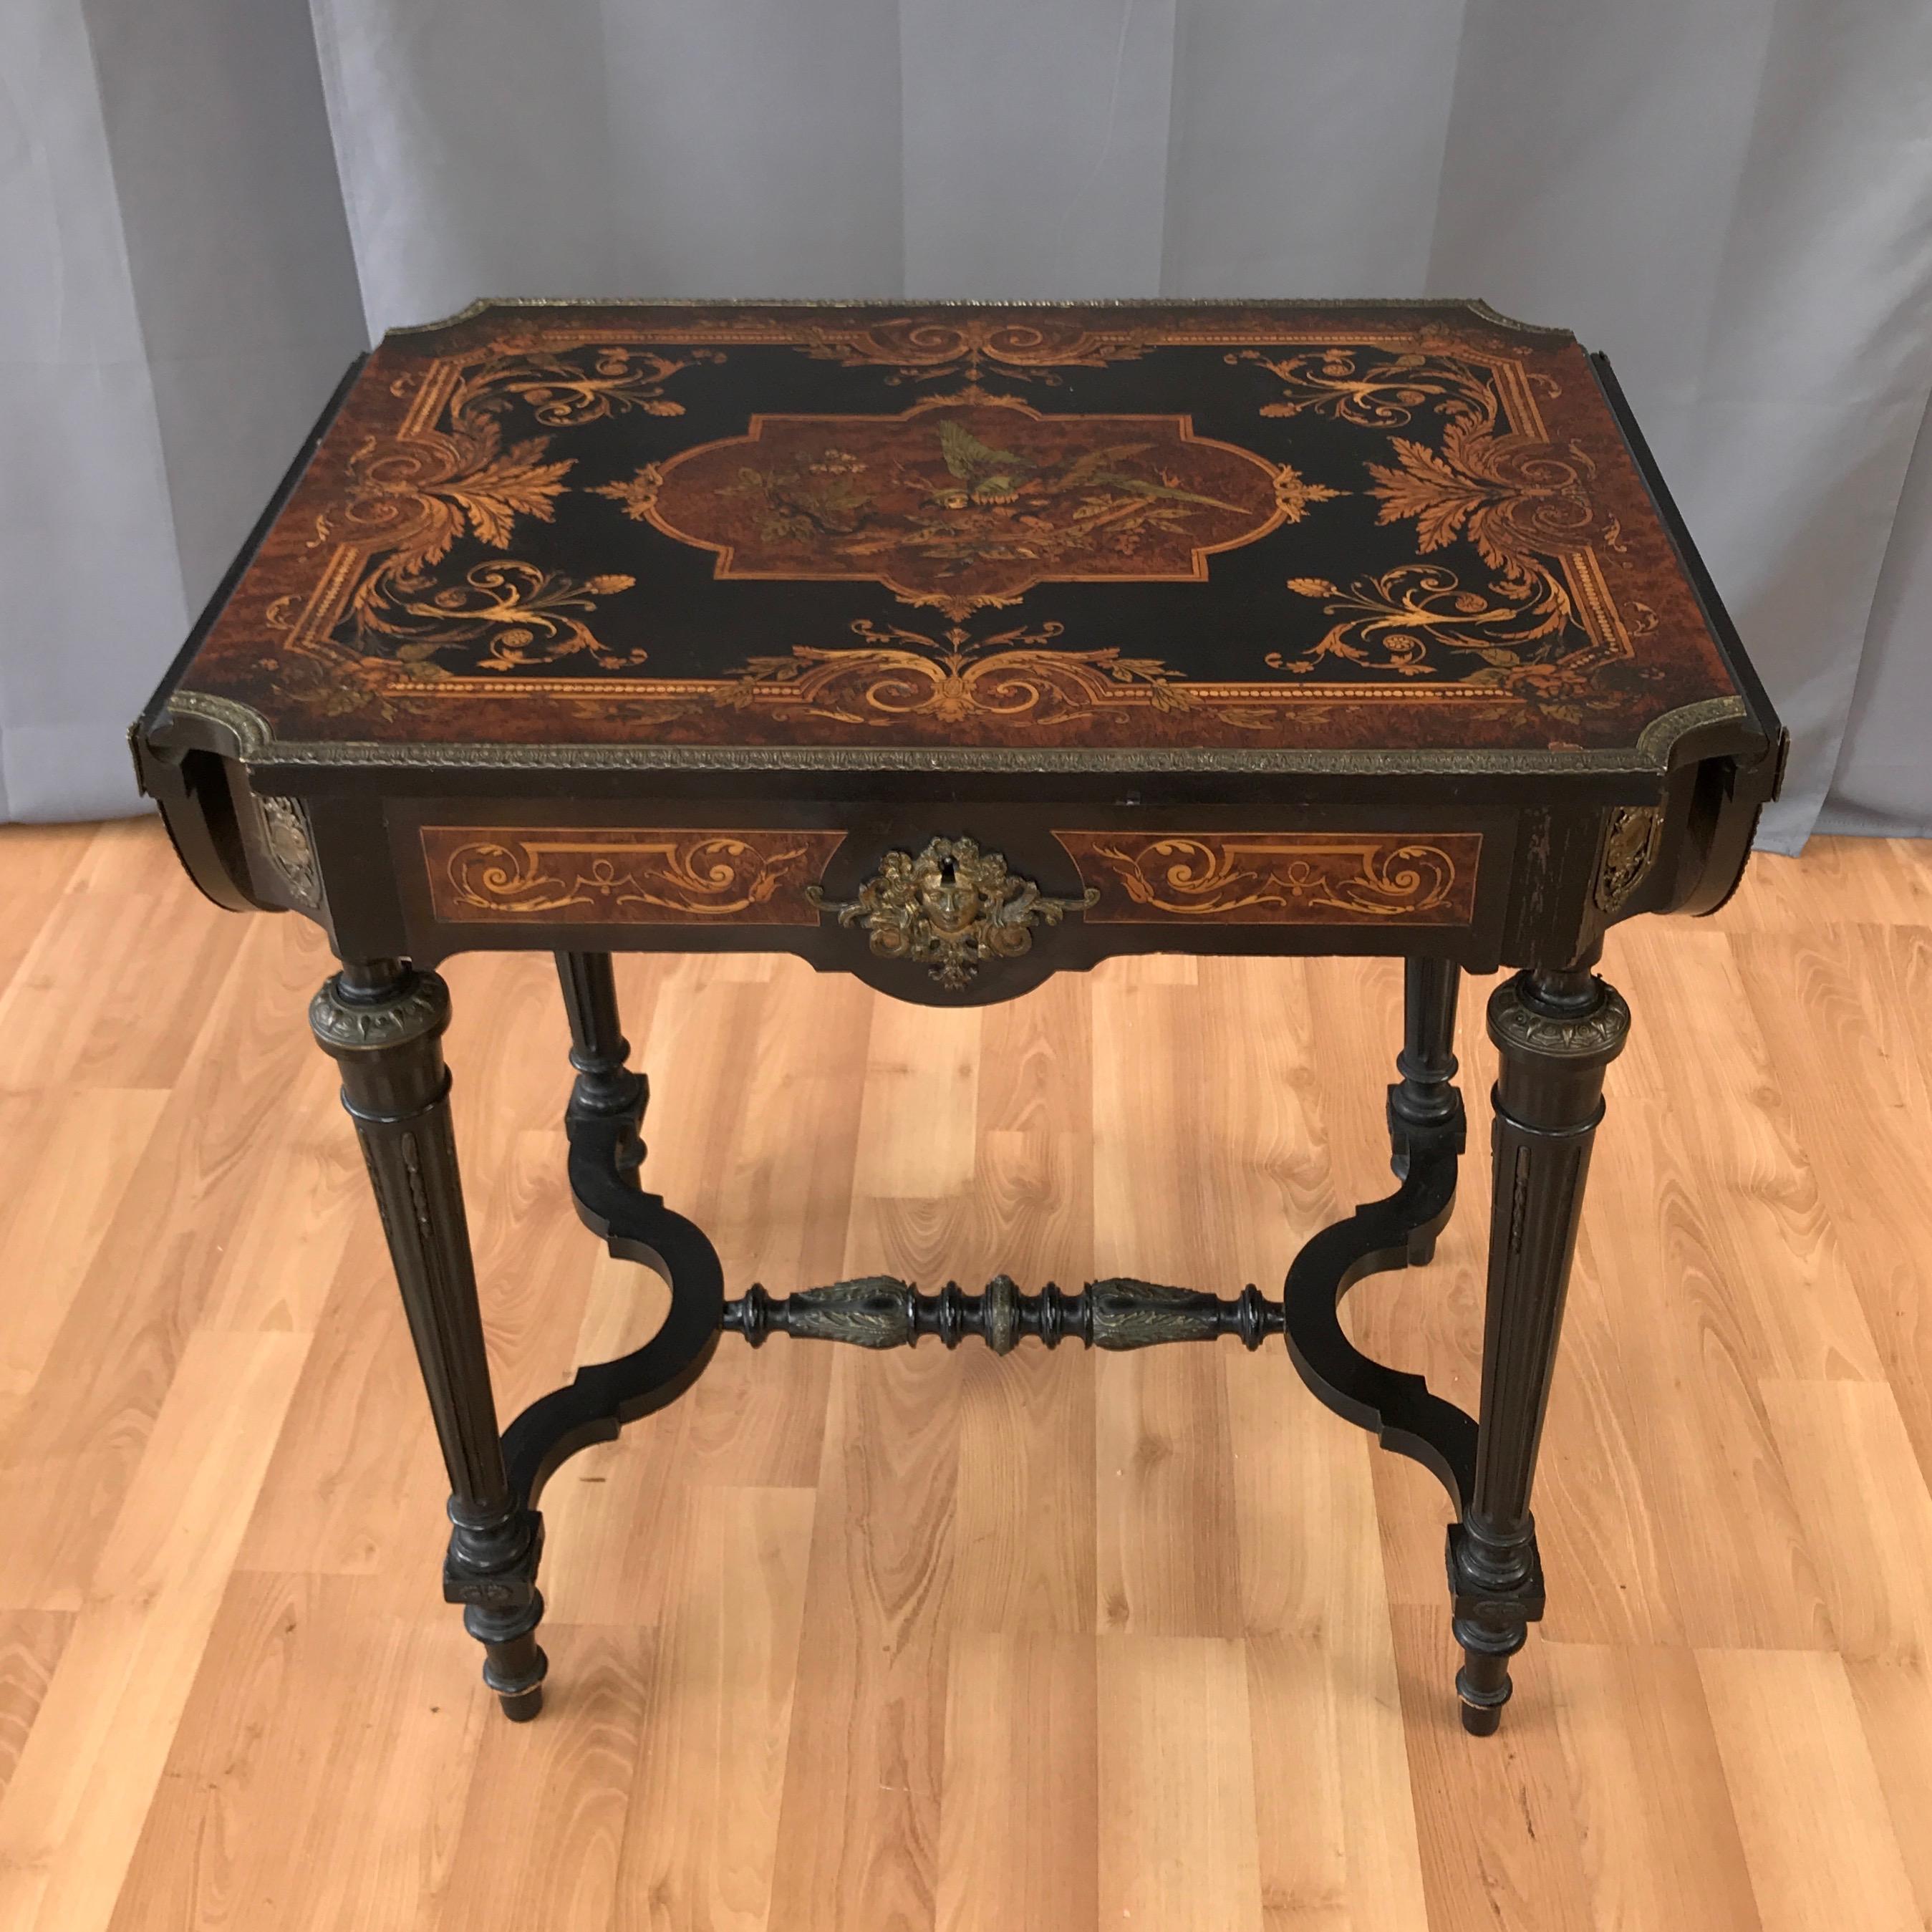 A mid-19th century Napoleon III drop-leaf salon or writing table with drawer, displaying wonderfully executed marquetry and ormolu decorations throughout.

Ebonized mahogany top, frame, and turned tapered legs, with a pair of leaves and single